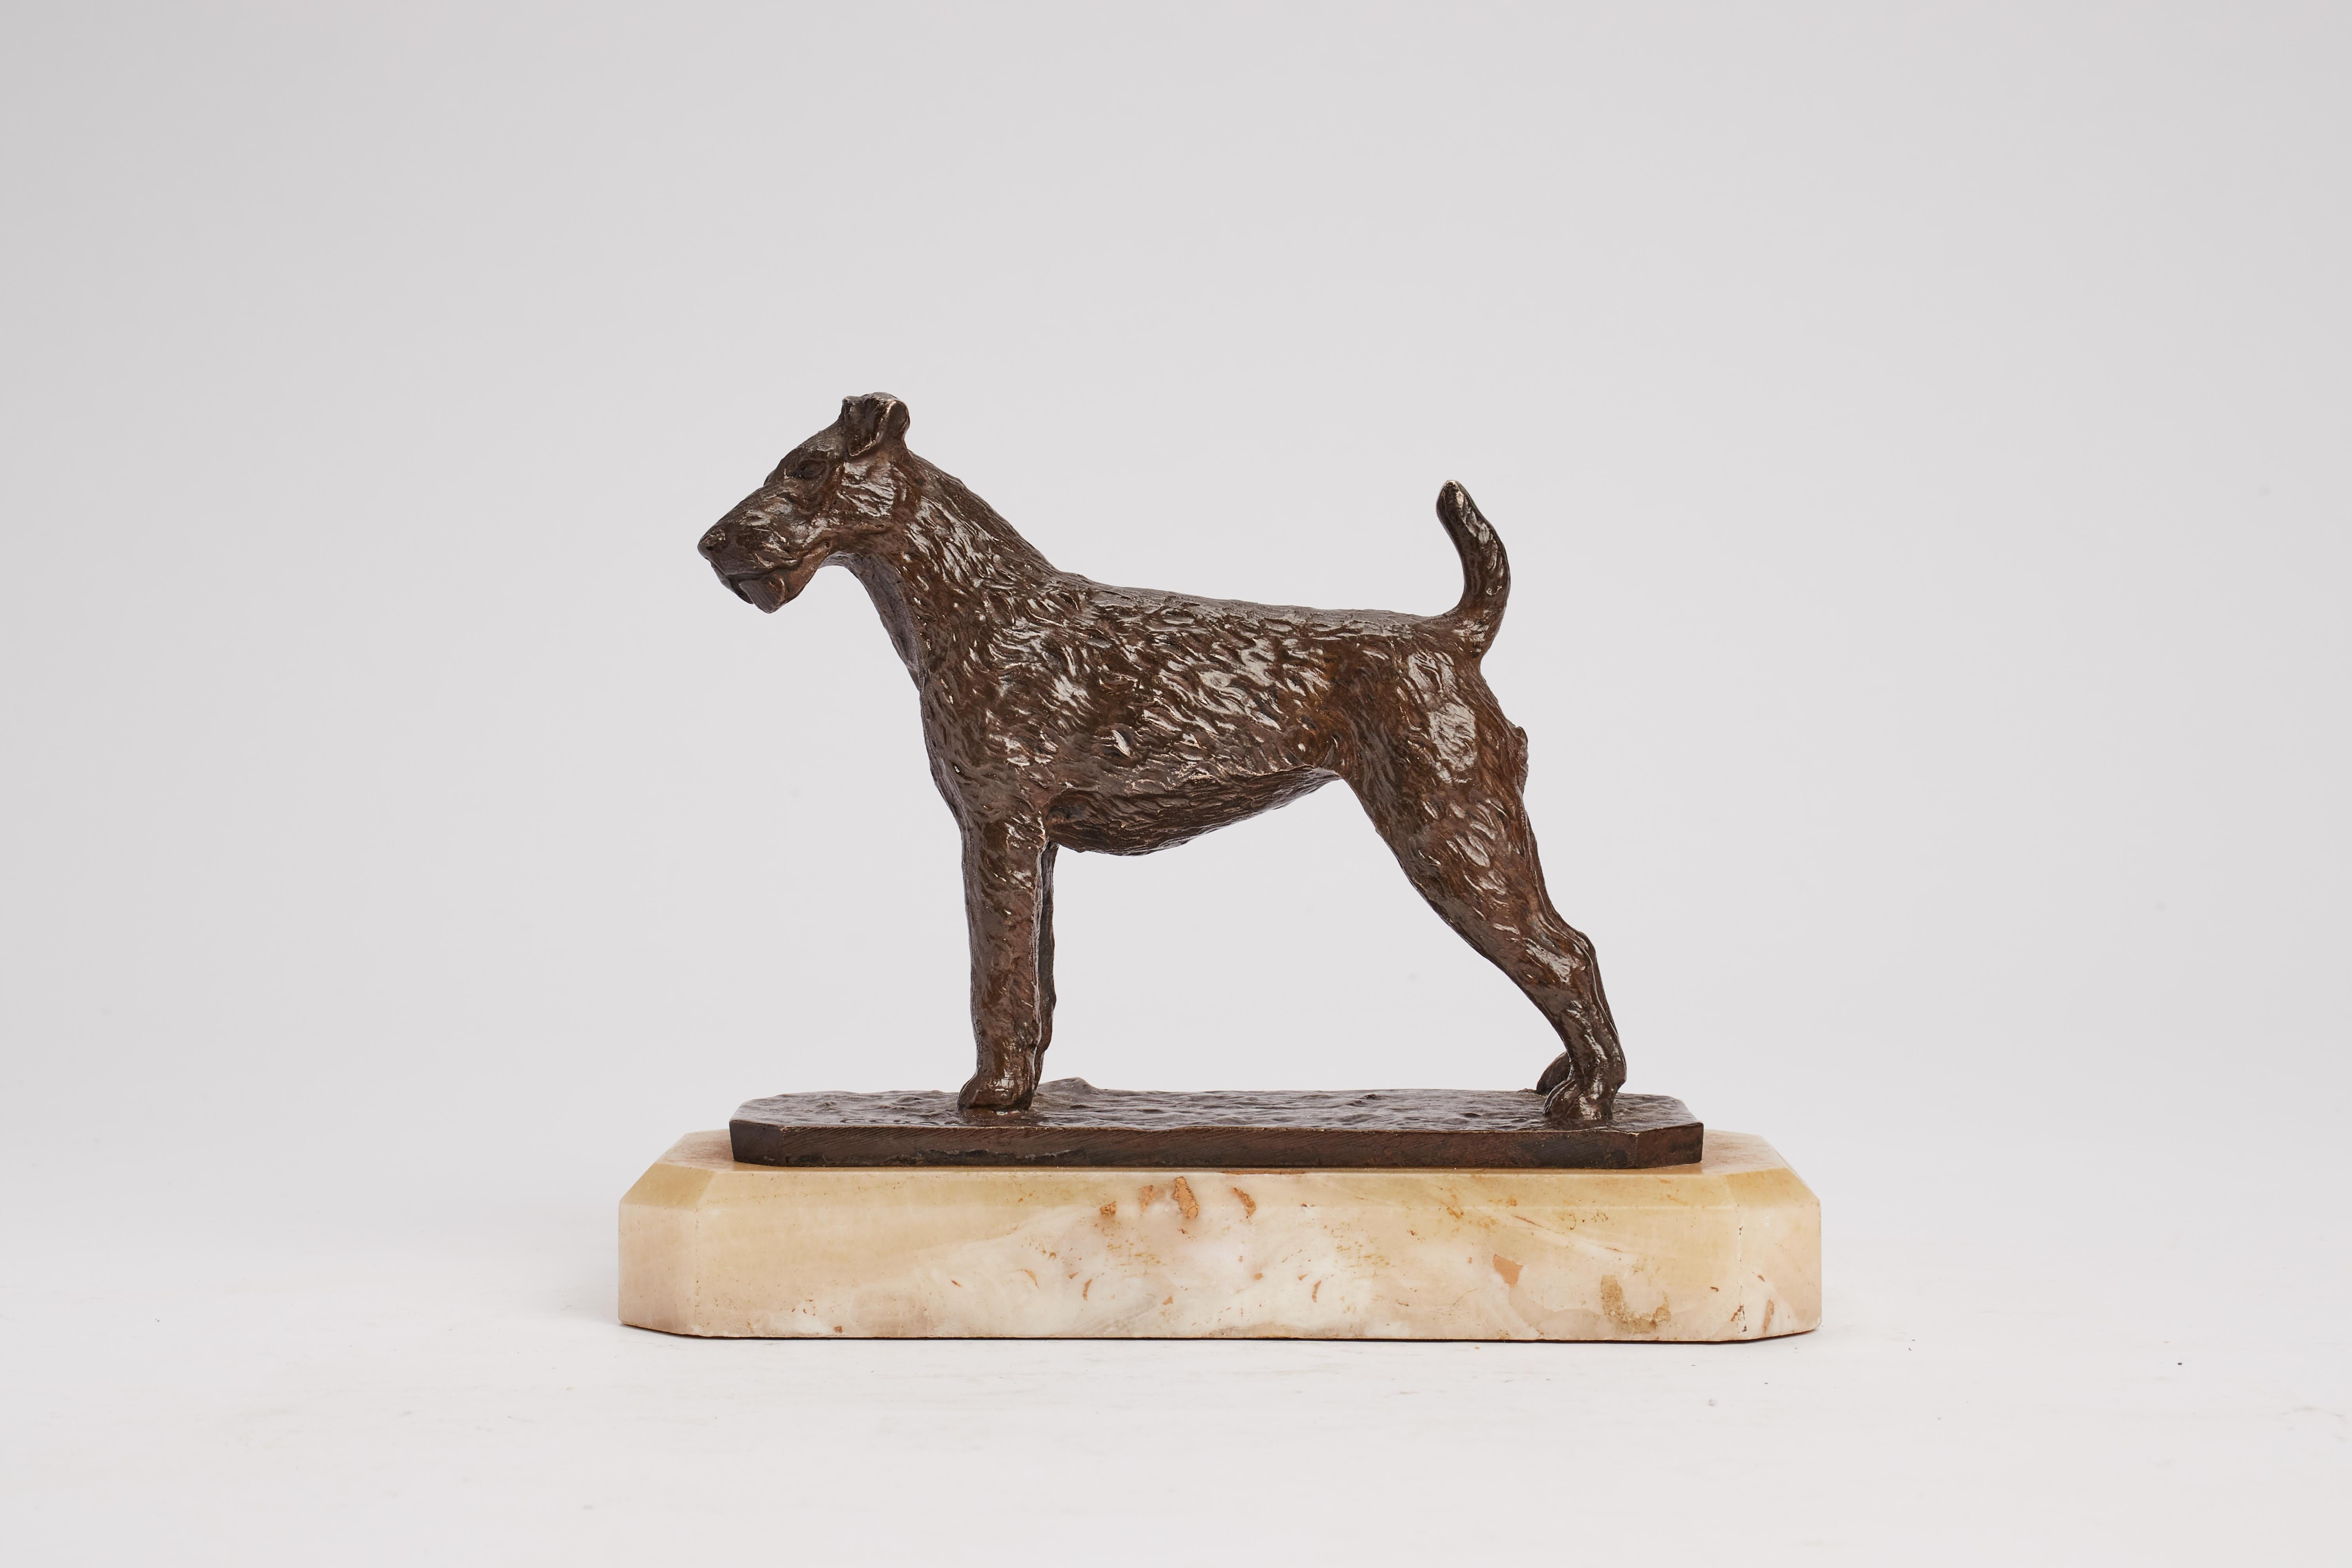 A bronze sculpture representing a fox Terrier dog on alabaster base. Signed C.Charles. France, 1920